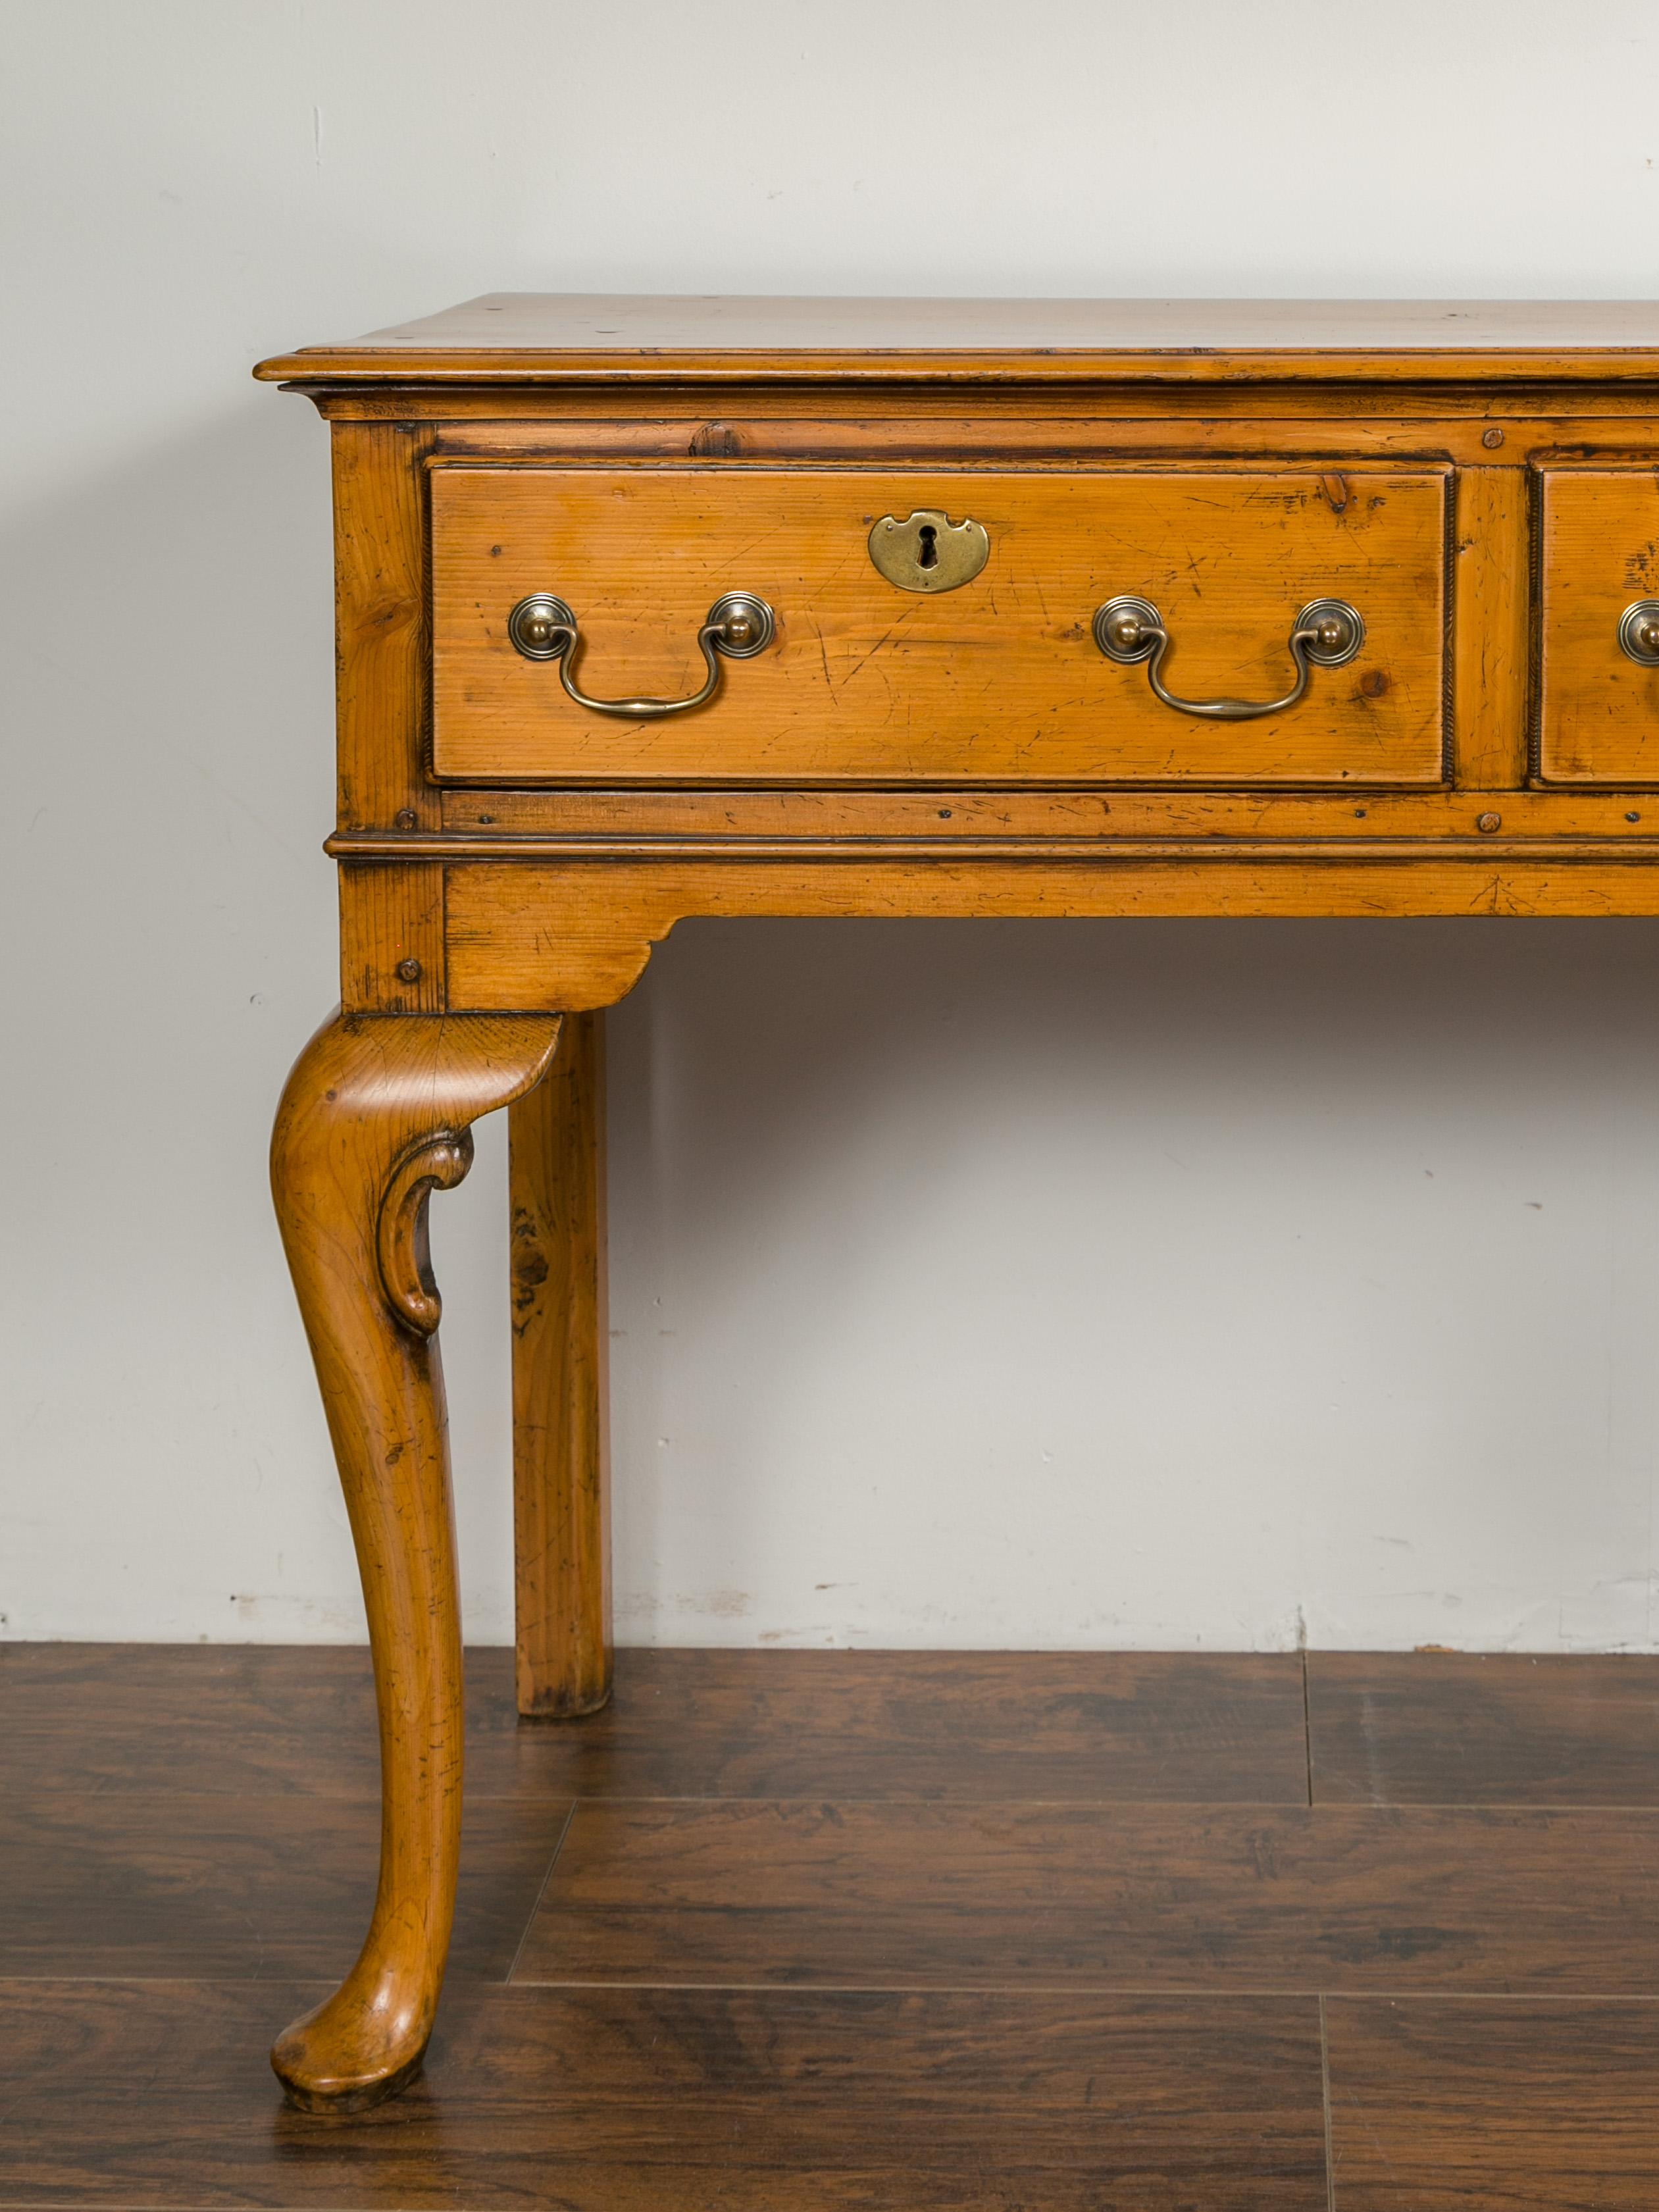 20th Century English Pine Sideboard with Four Drawers and Cabriole Legs, circa 1900